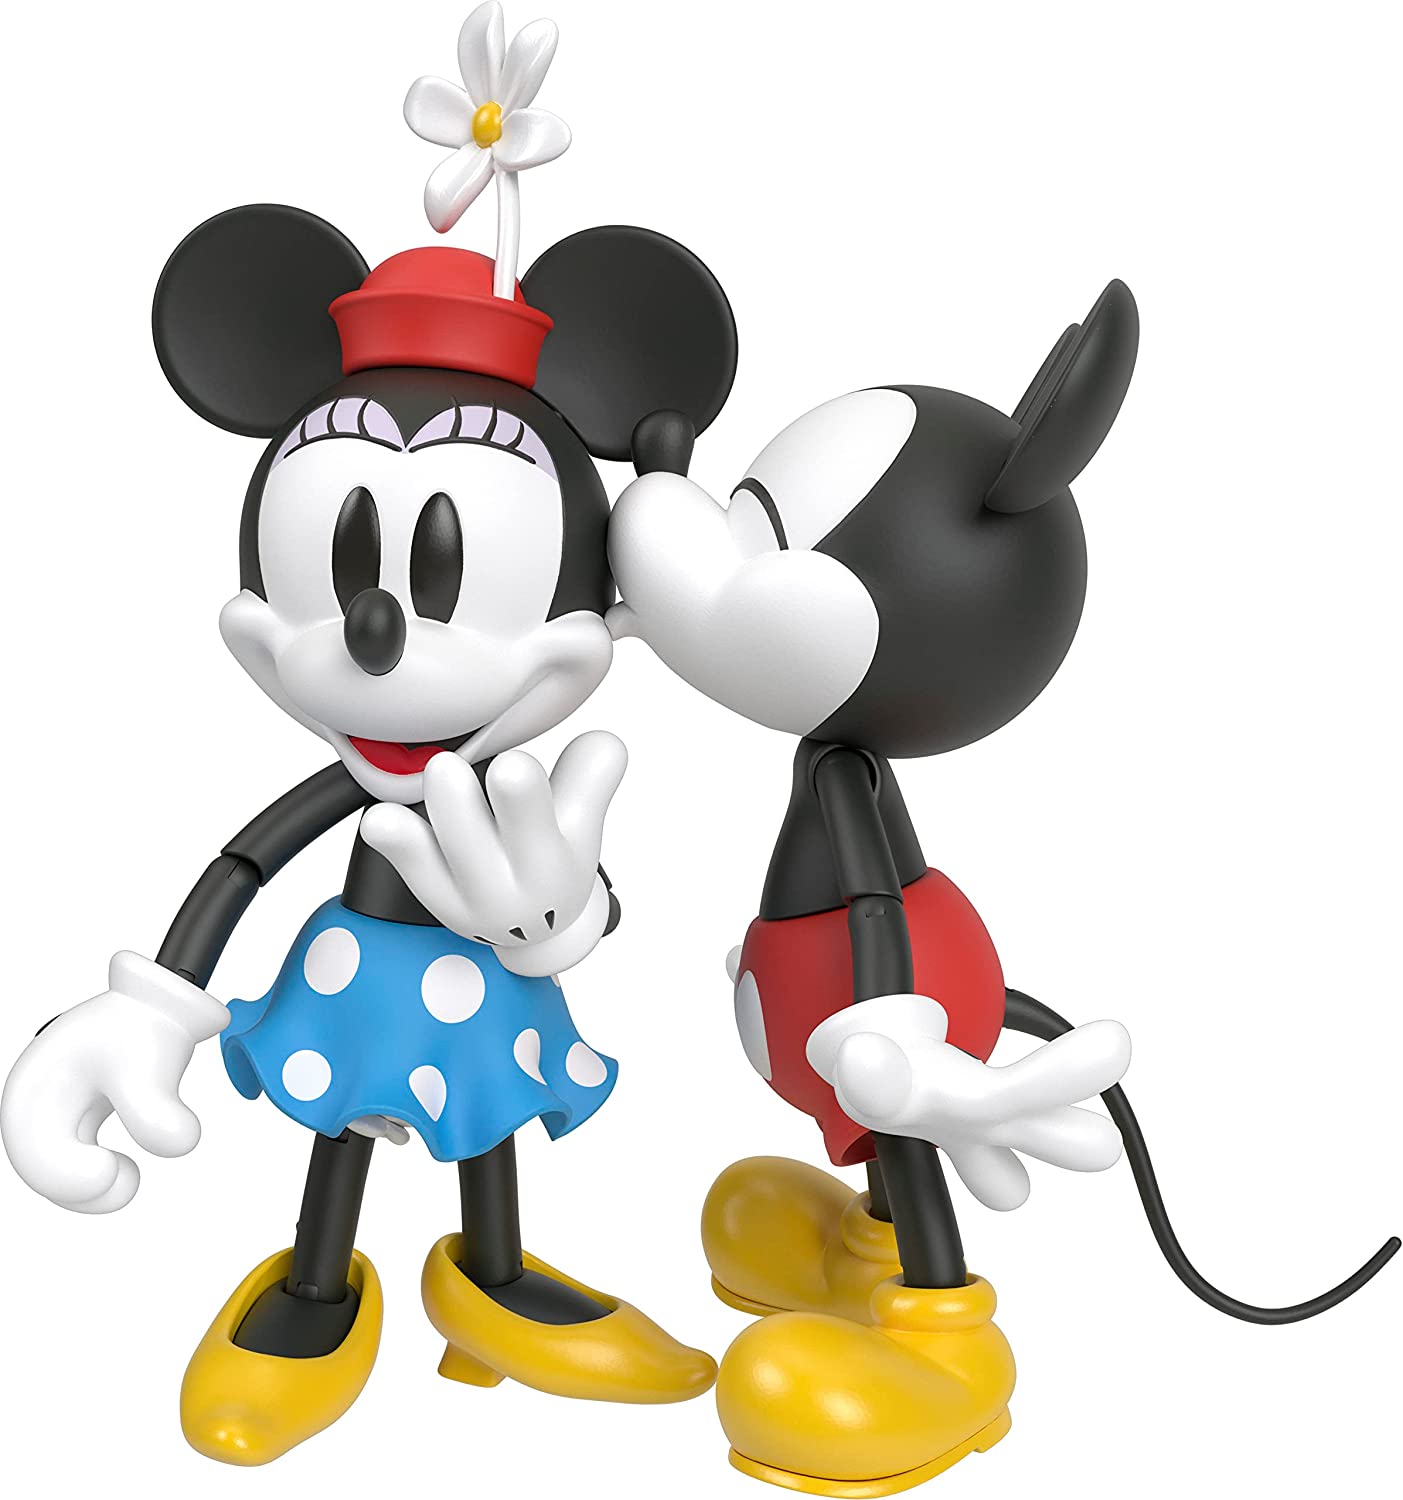 2-Pack Disney 100 Collectible Mickey and Minnie Mouse Action Figures w/ Accessories $34 + Free Shipping